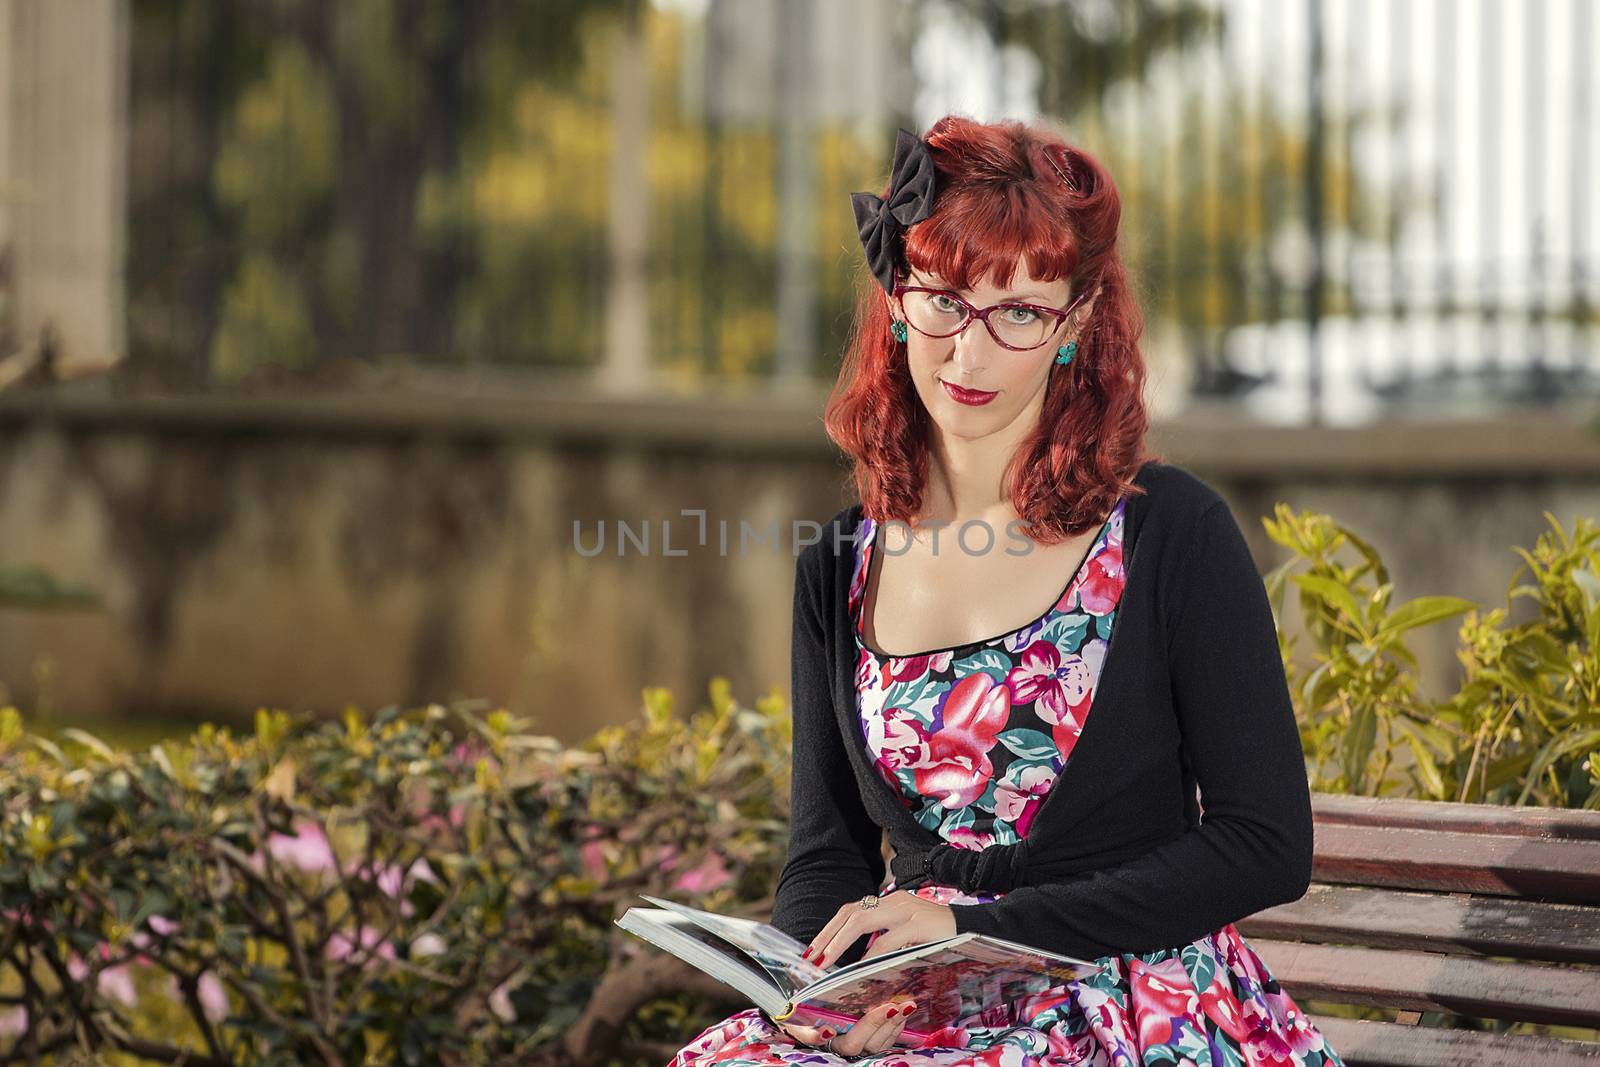 View of pinup young woman in vintage style clothing